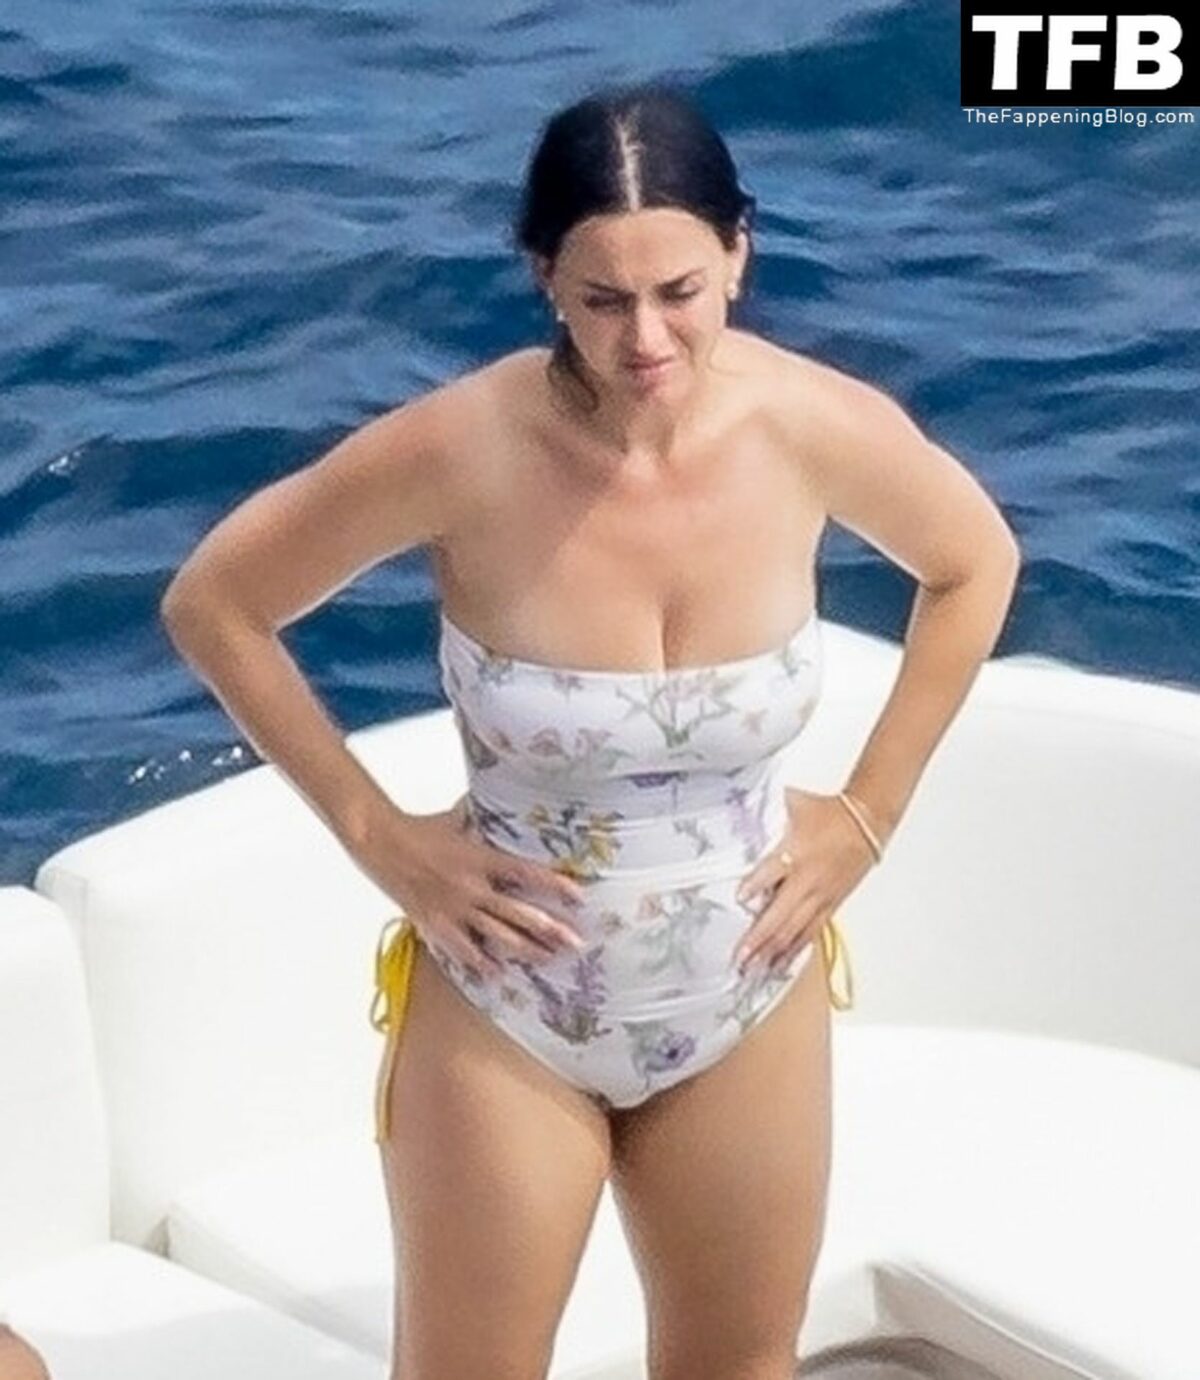 Katy Perry Sexy The Fappening Blog 1 1200x1380 - Katy Perry Rocks a Strapless Swimsuit While Enjoying a Beach Day with Orlando Bloom in Positano (105 Photos)